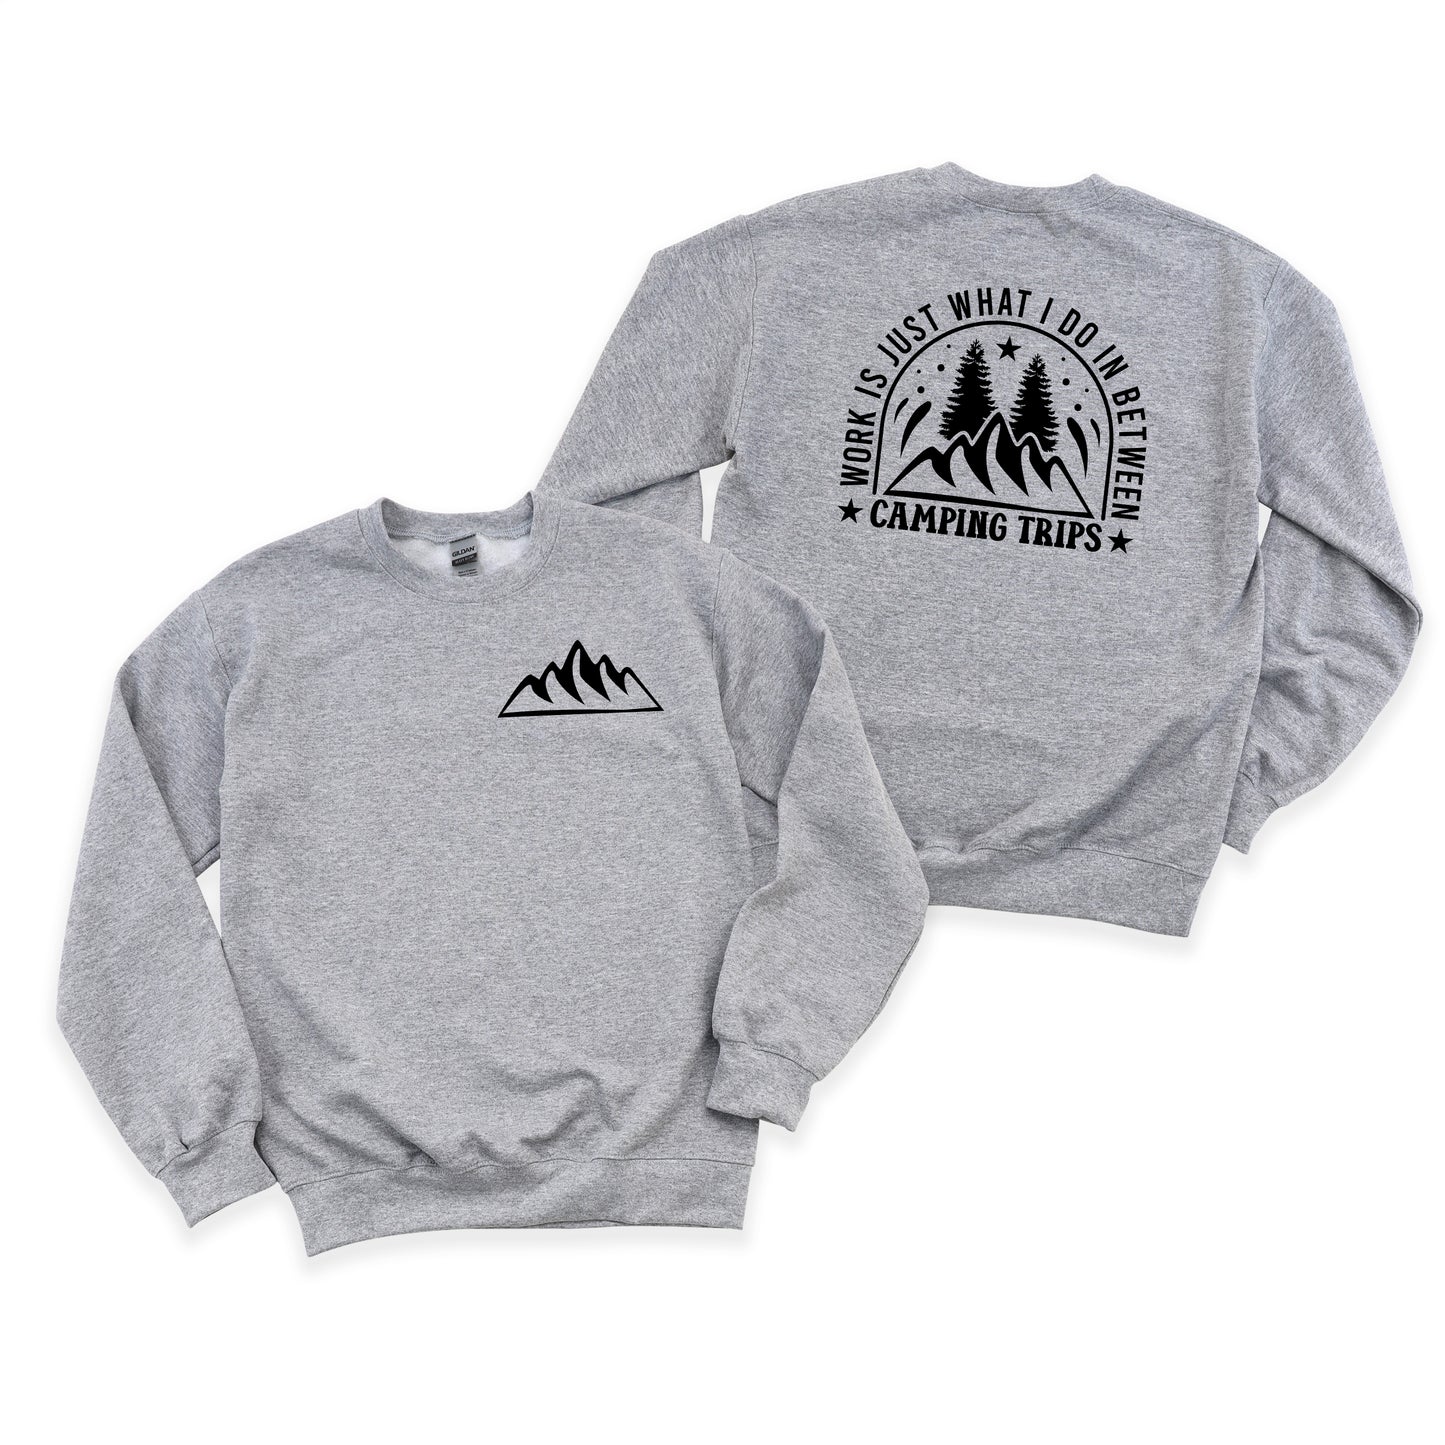 Work Between Camping Trips | Front and Back Sweatshirt